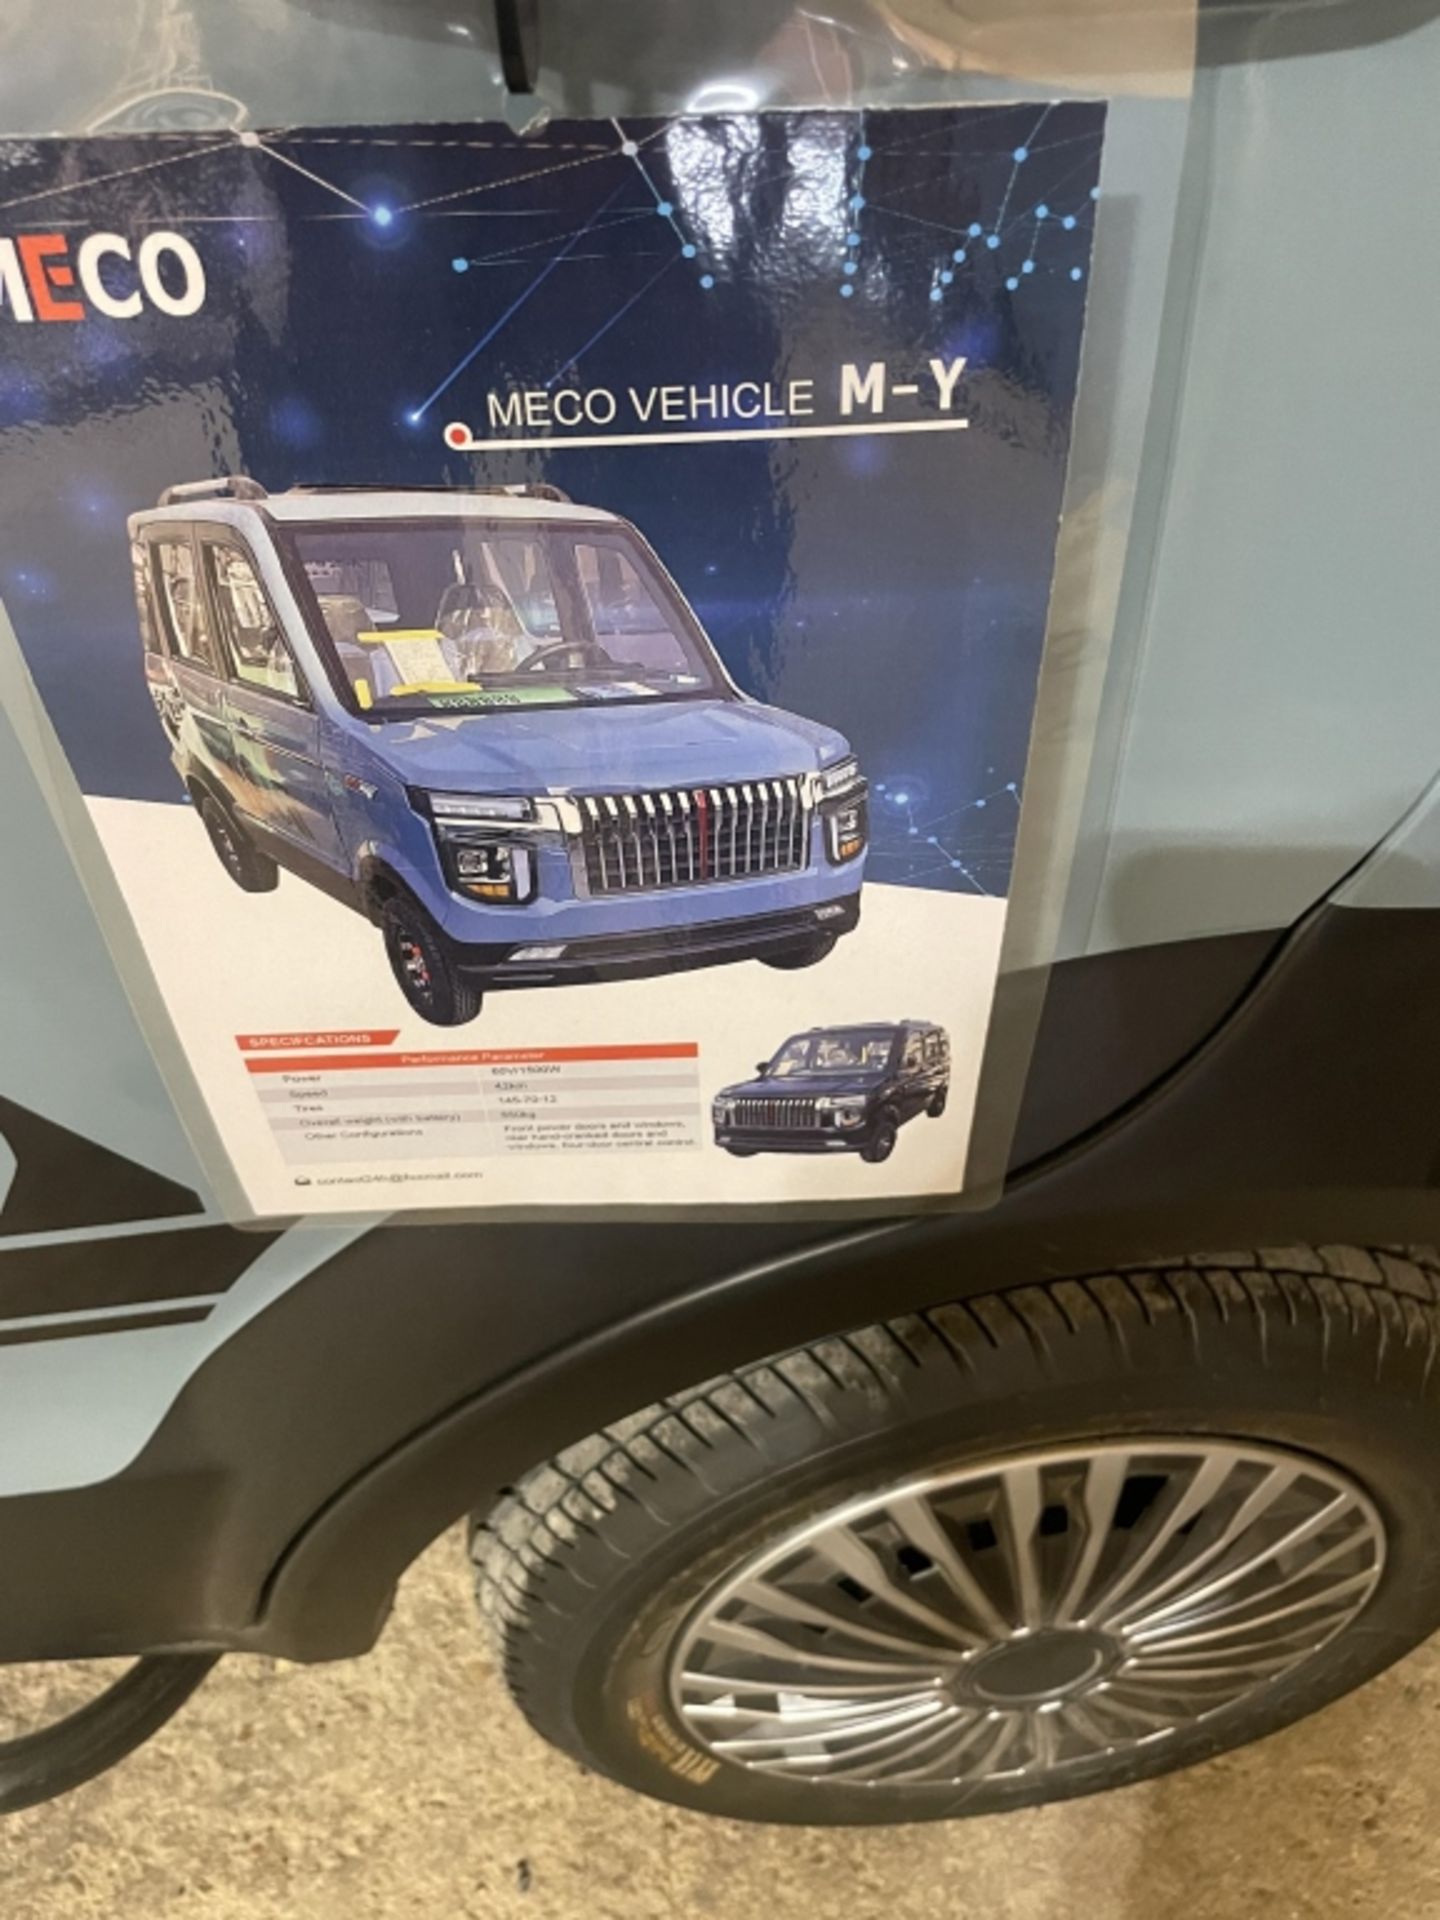 MECO M-Y Electric Vehicle - Image 21 of 25